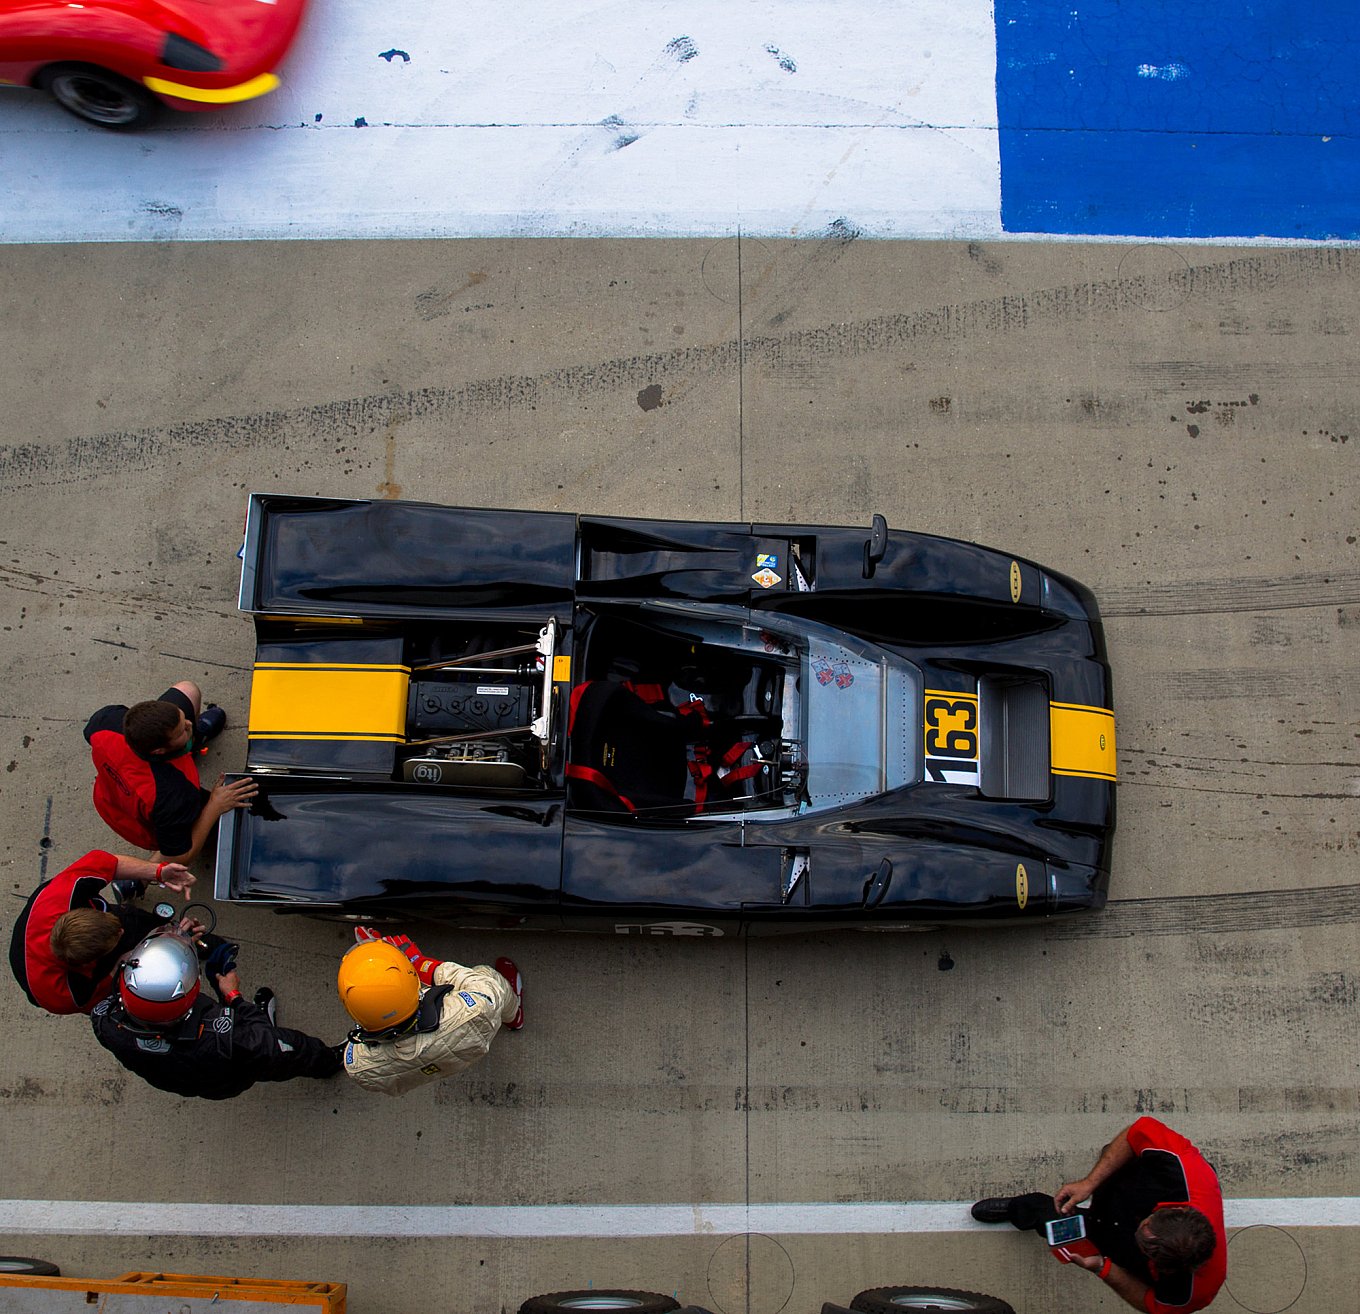 silverstone-classic-racing-cars-from-above-4